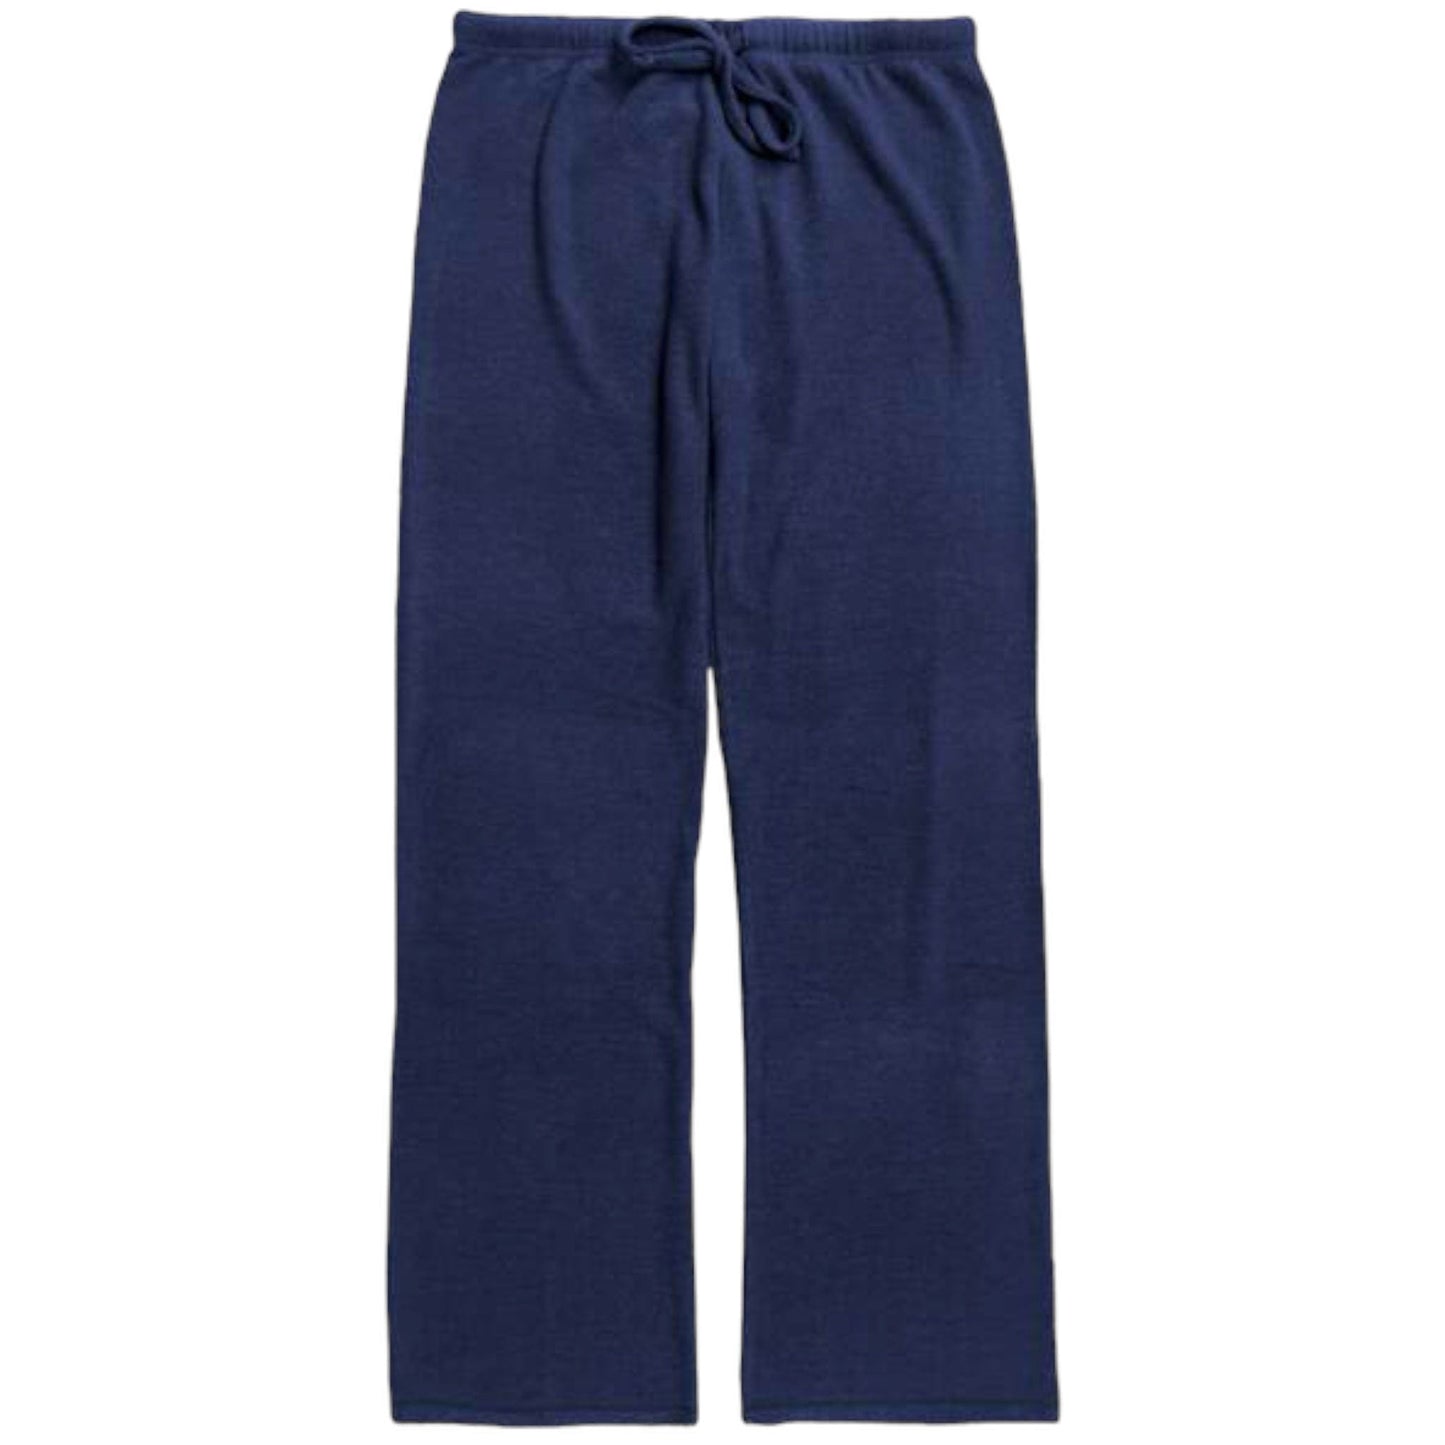 Cuddle Soft Straight Leg Pant - Tons of Colors Available